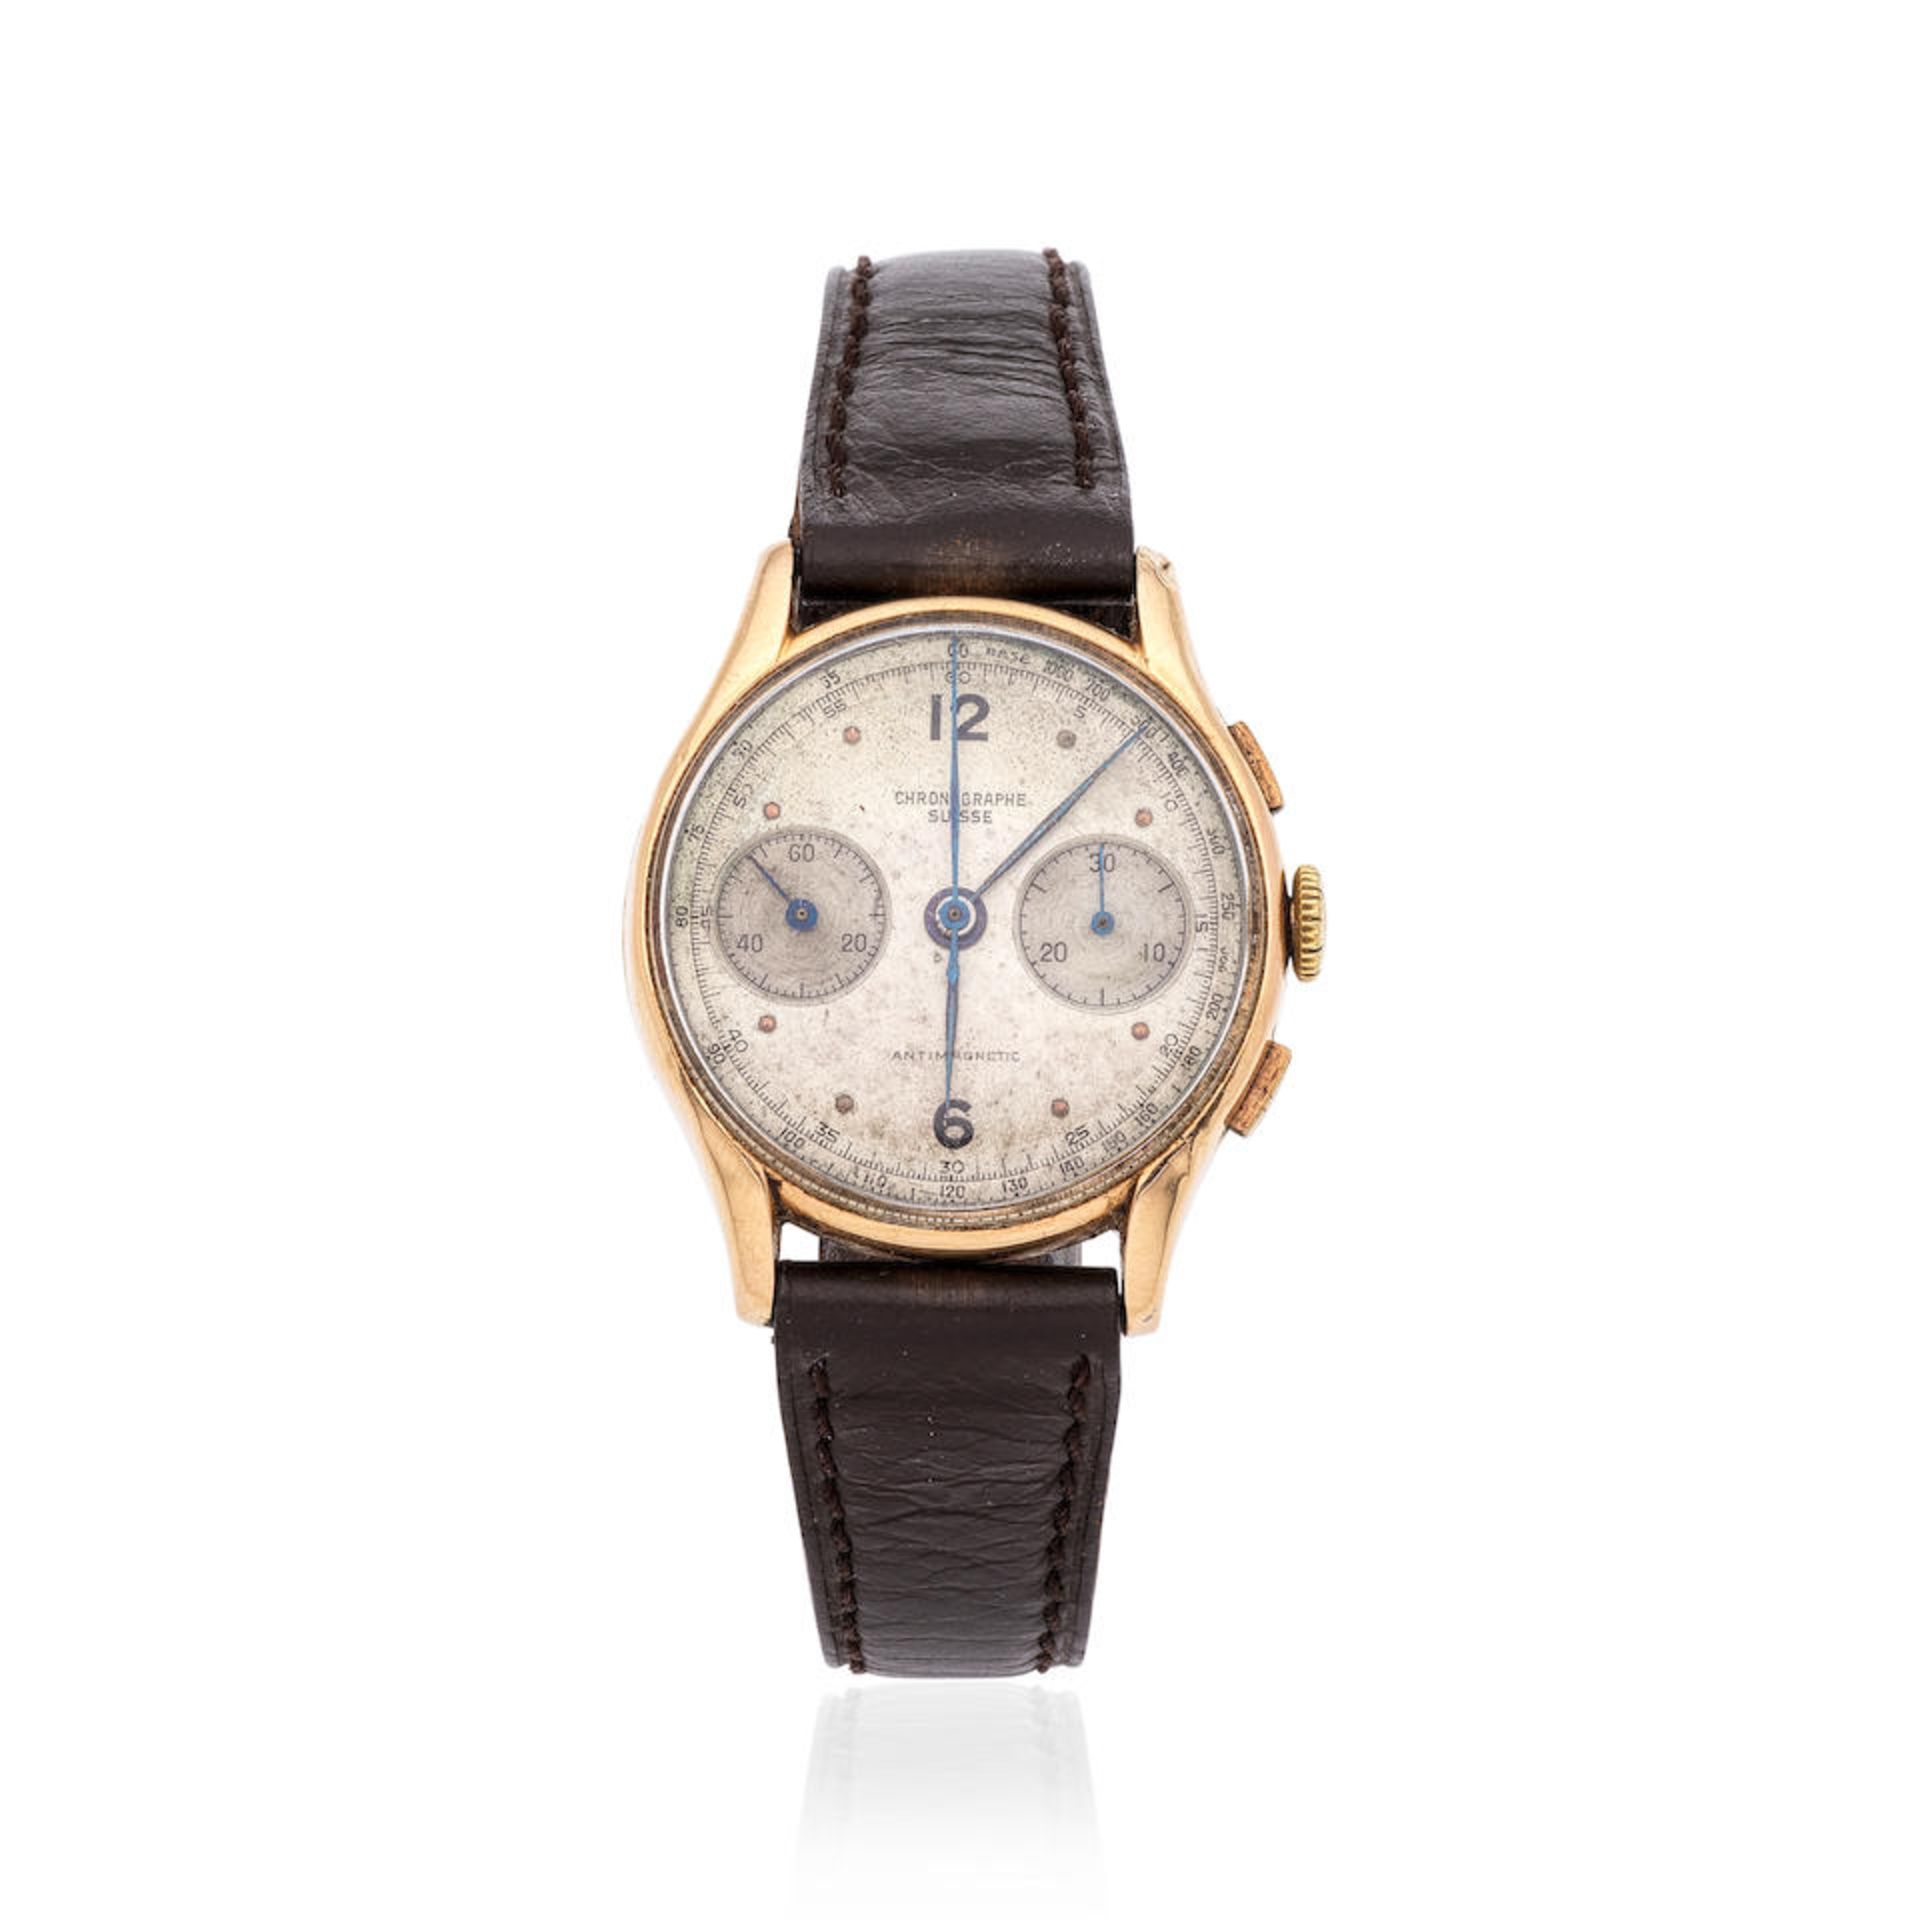 Chronographe Suisse. An 18K gold manual wind chronograph wristwatch Chronographe Suisse. Chronog...